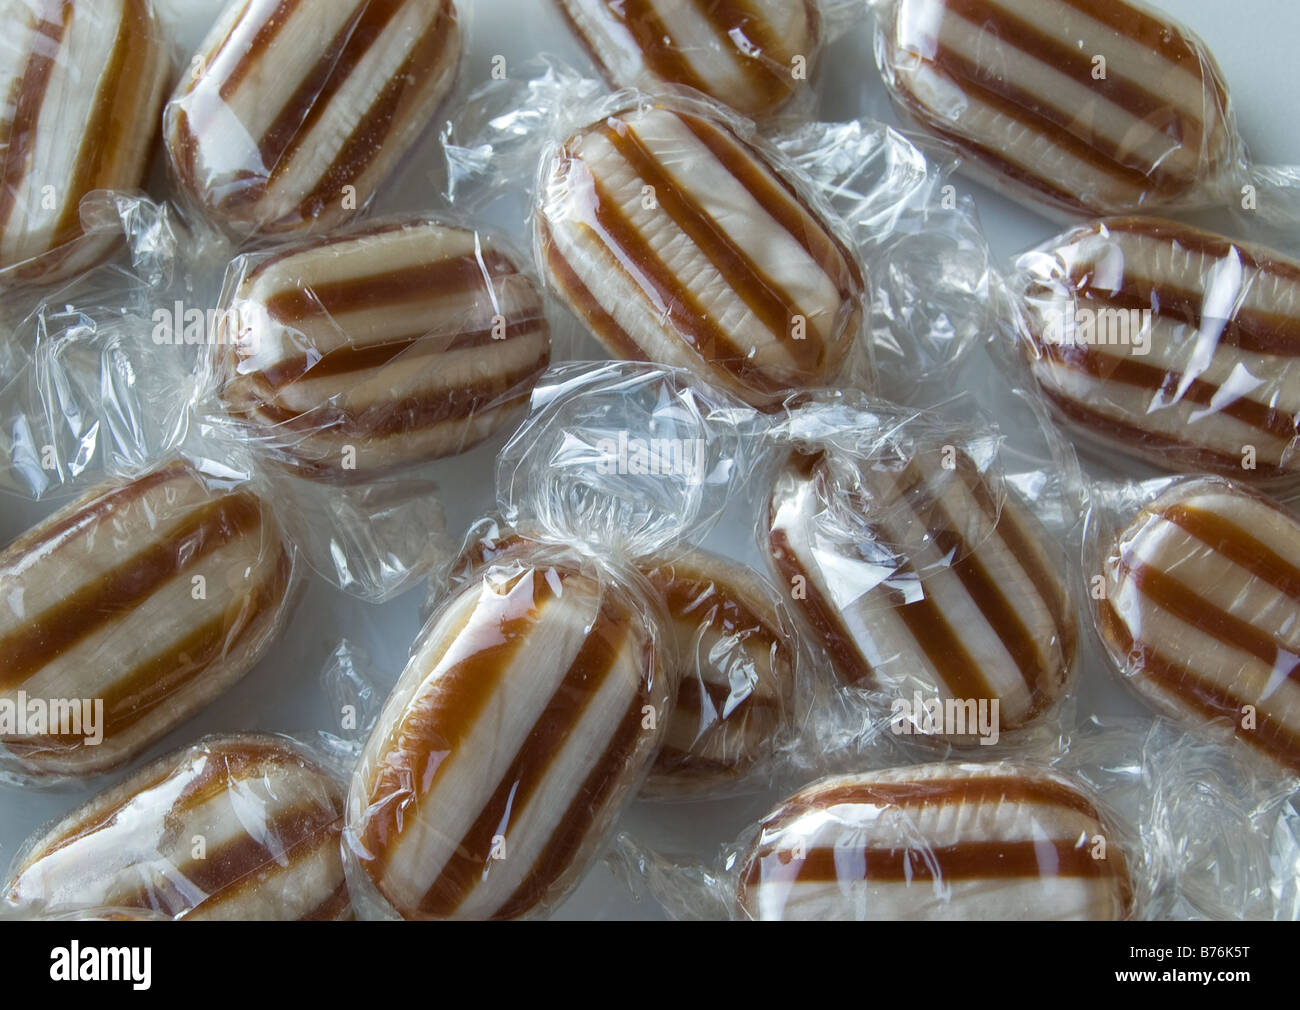 Humbug mint sweets in shiny wrappers Stock Photo